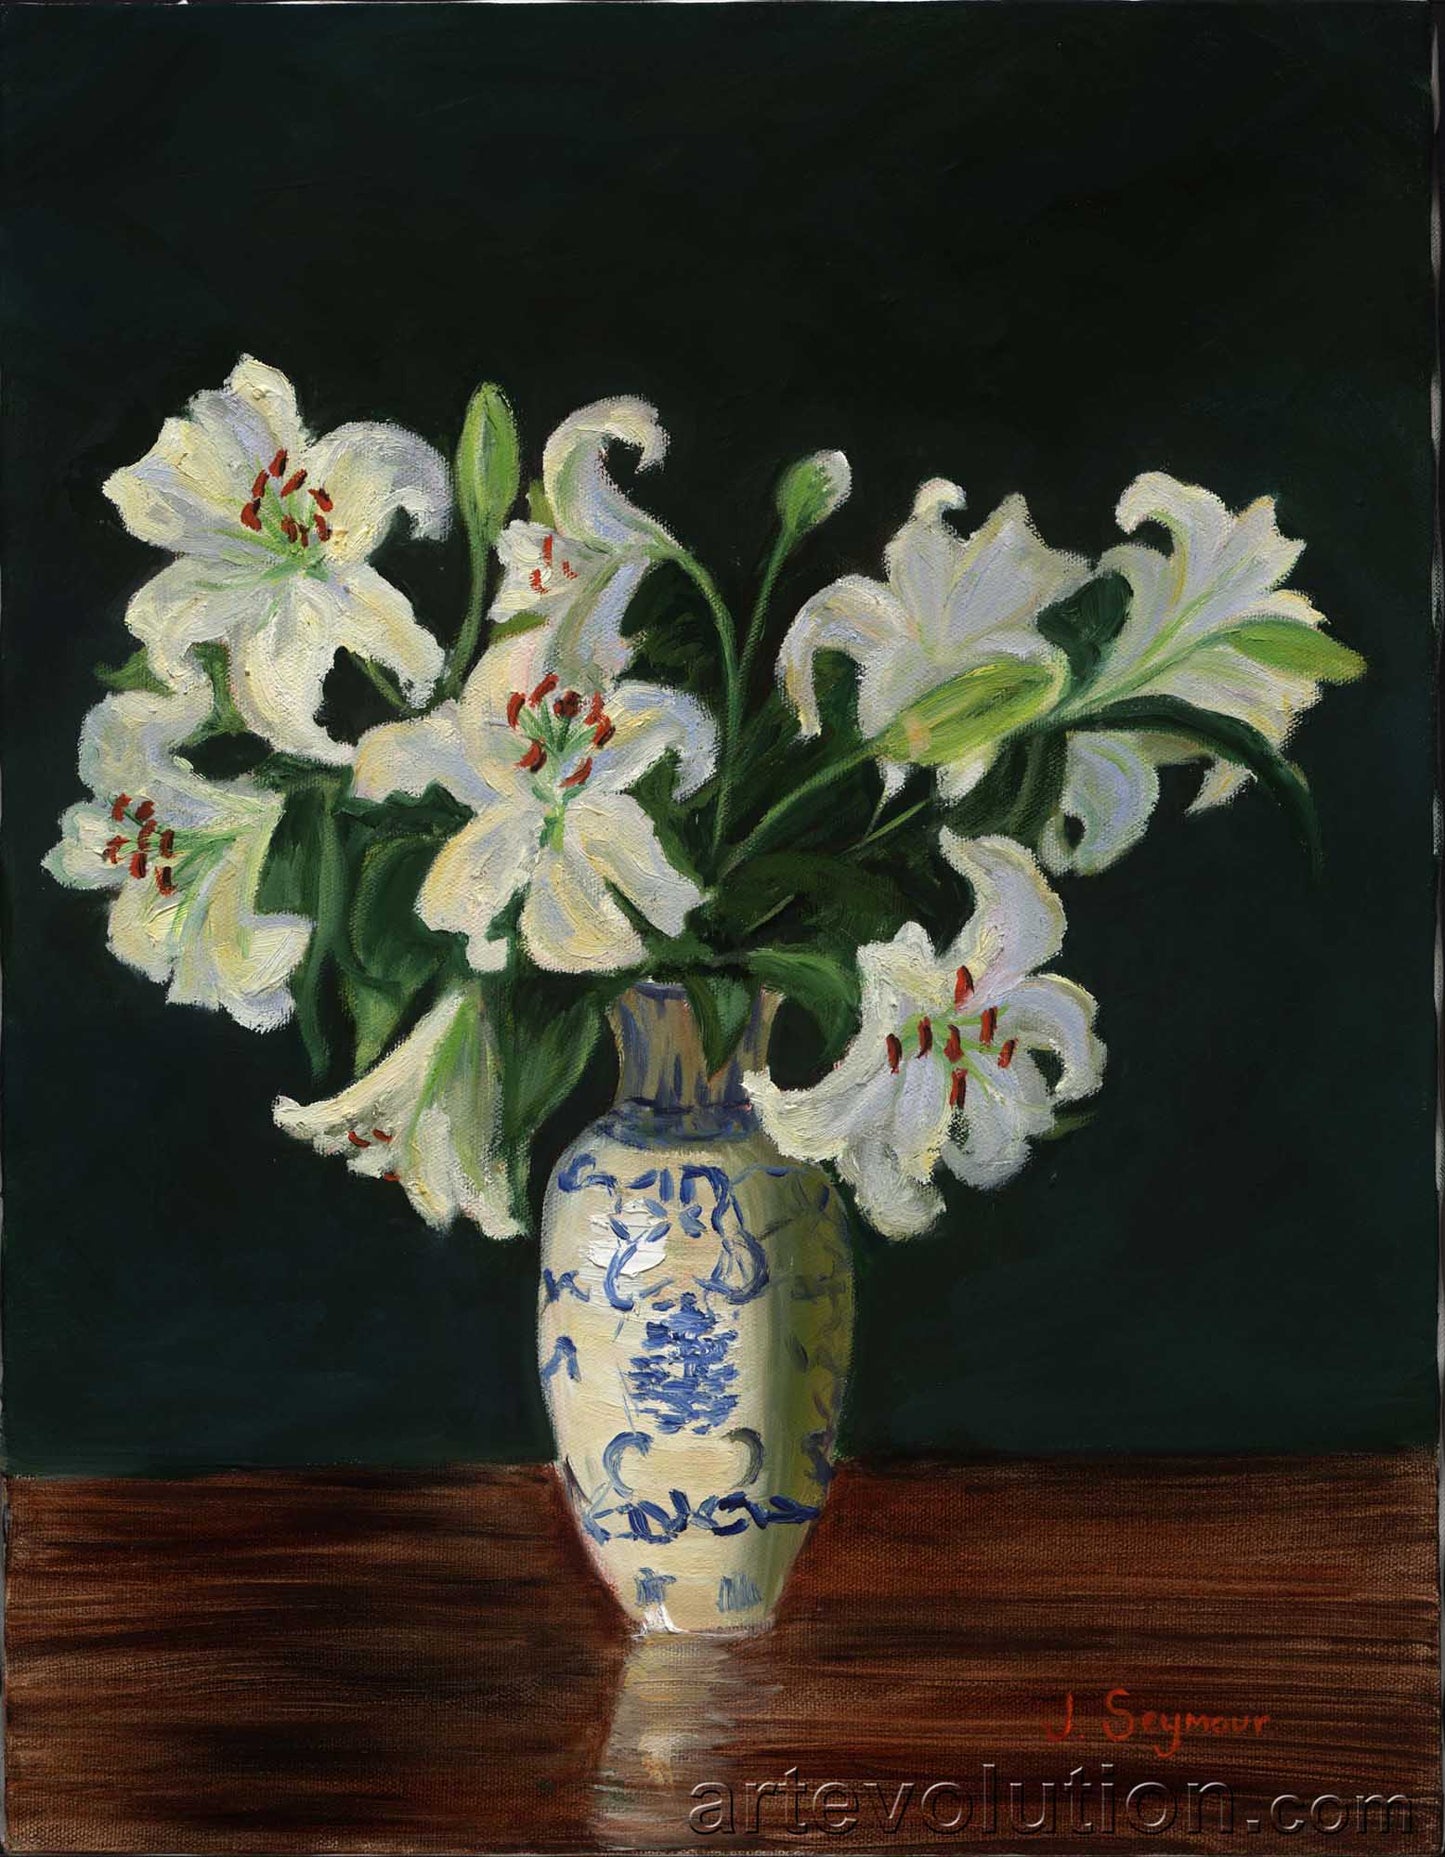 Lilies in Chinese Vase with Dark Background